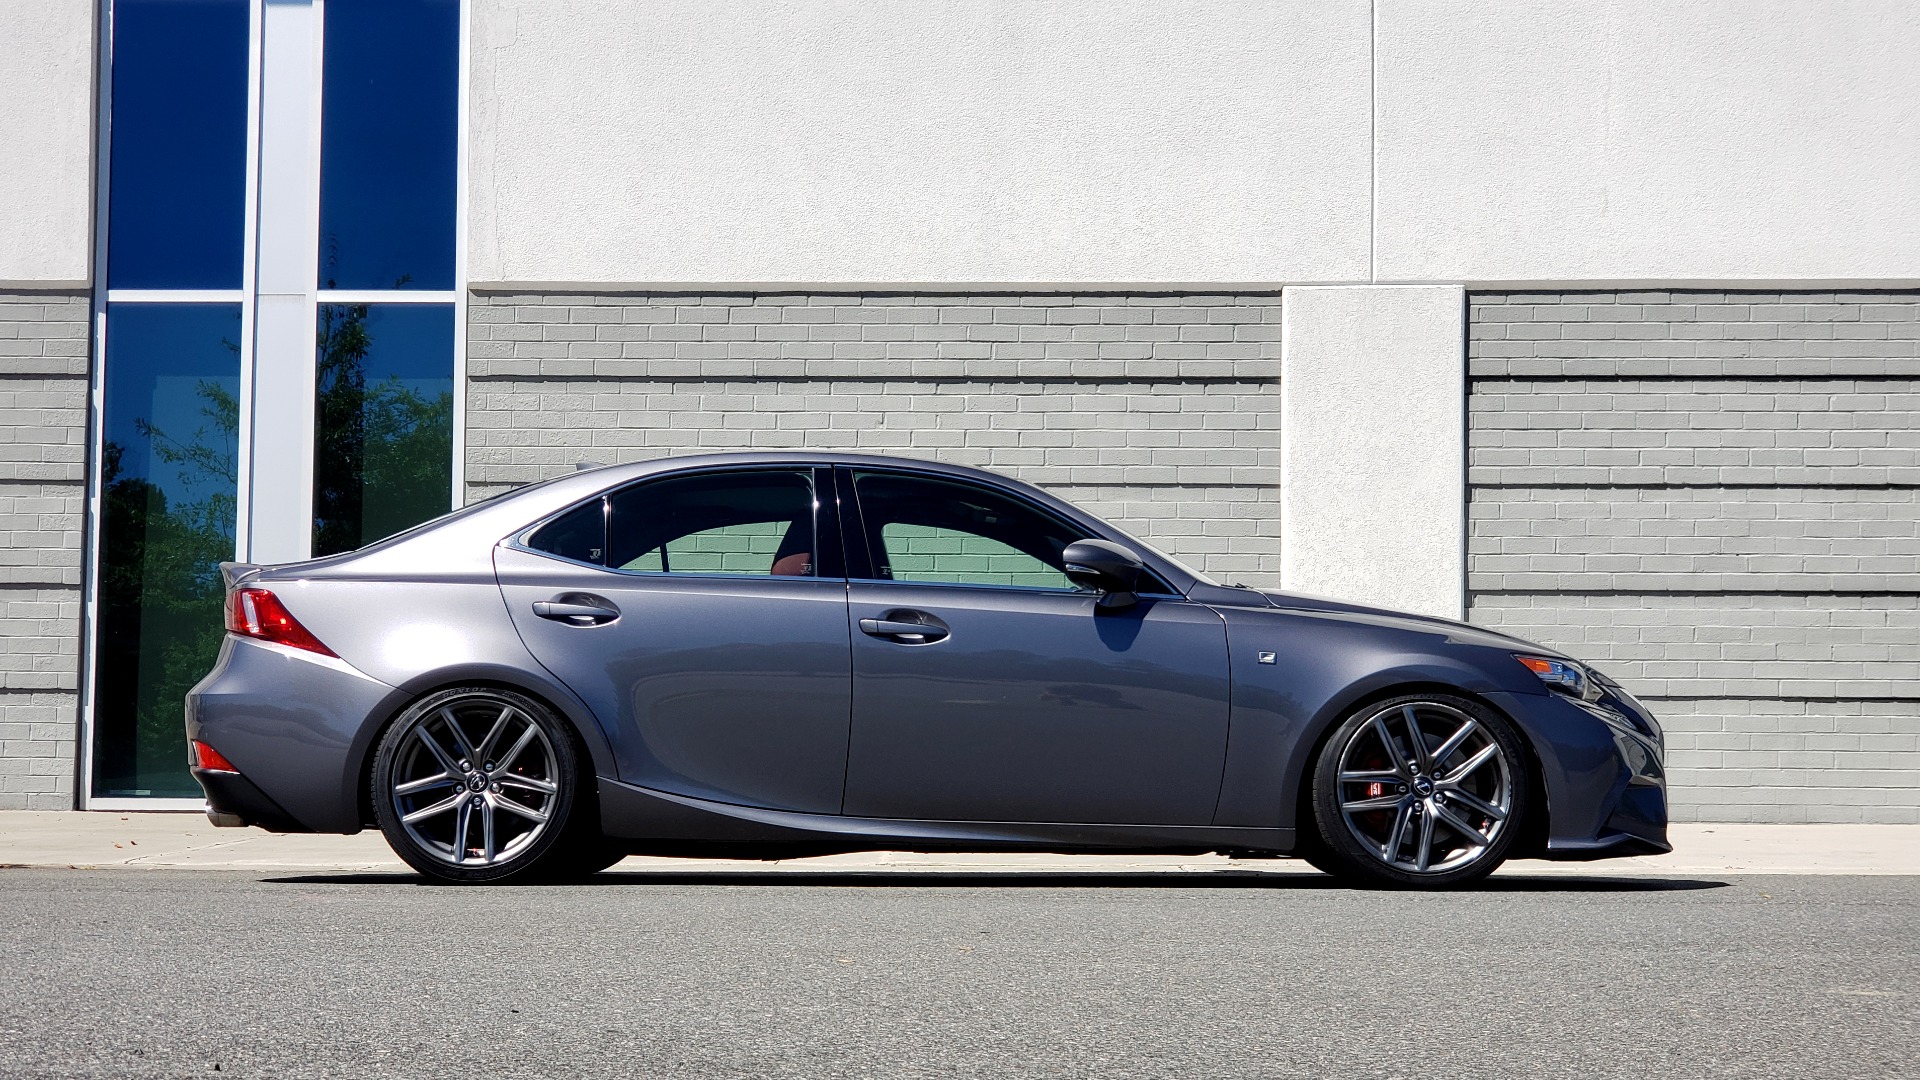 Used 2016 Lexus IS 200T F-SPORT SEDAN / SUNROOF / LCA / HTD & CLD SEATS / REARVIEW for sale Sold at Formula Imports in Charlotte NC 28227 13